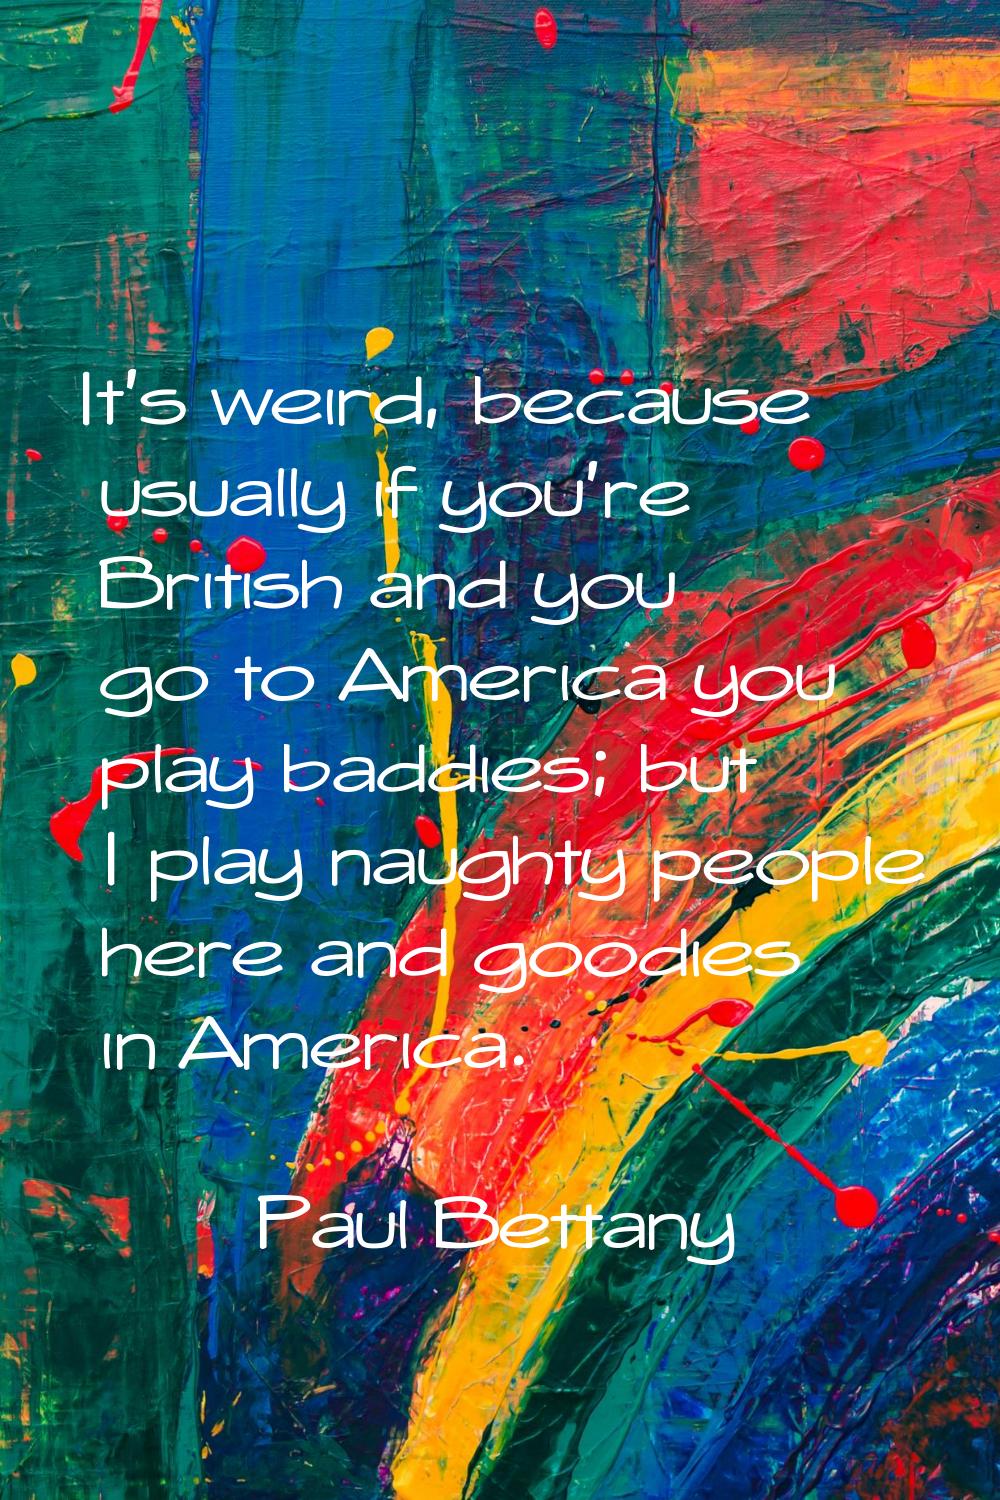 It's weird, because usually if you're British and you go to America you play baddies; but I play na